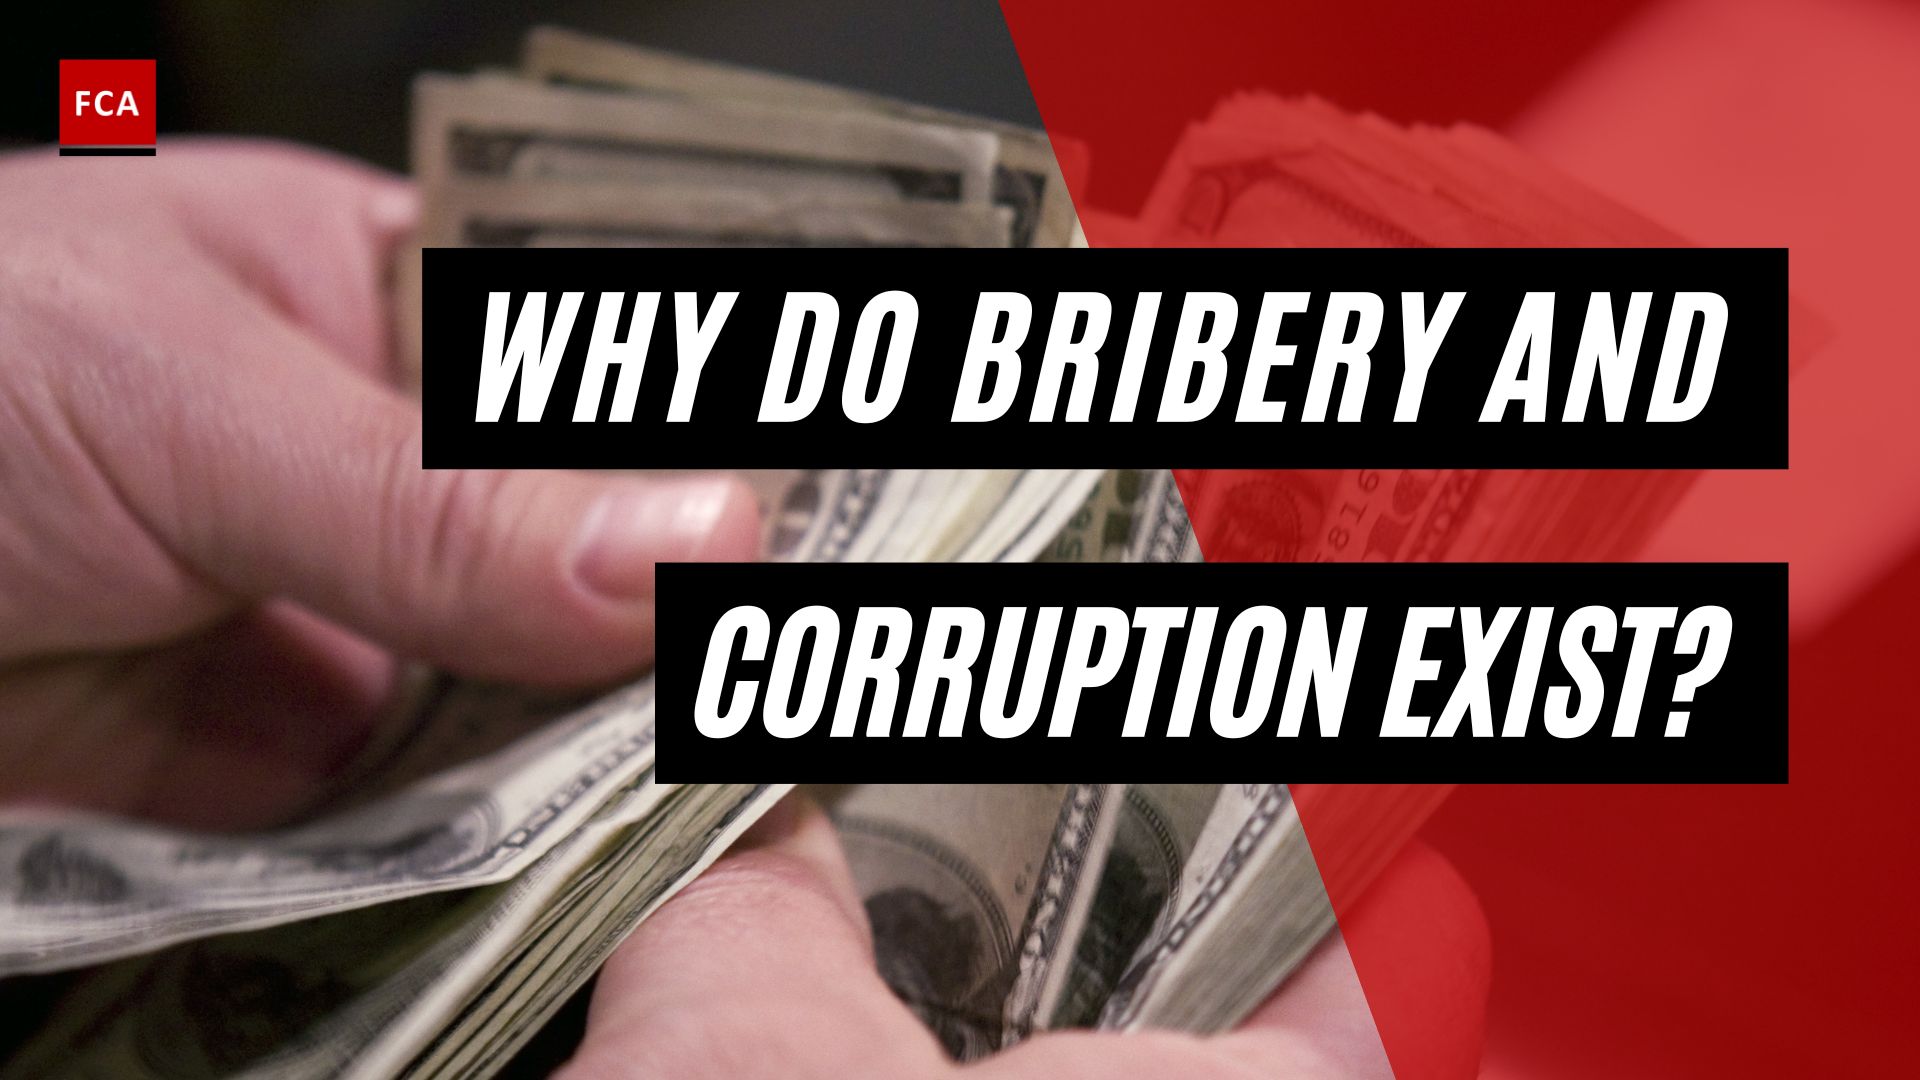 Why Do Bribery And Corruption Exist?